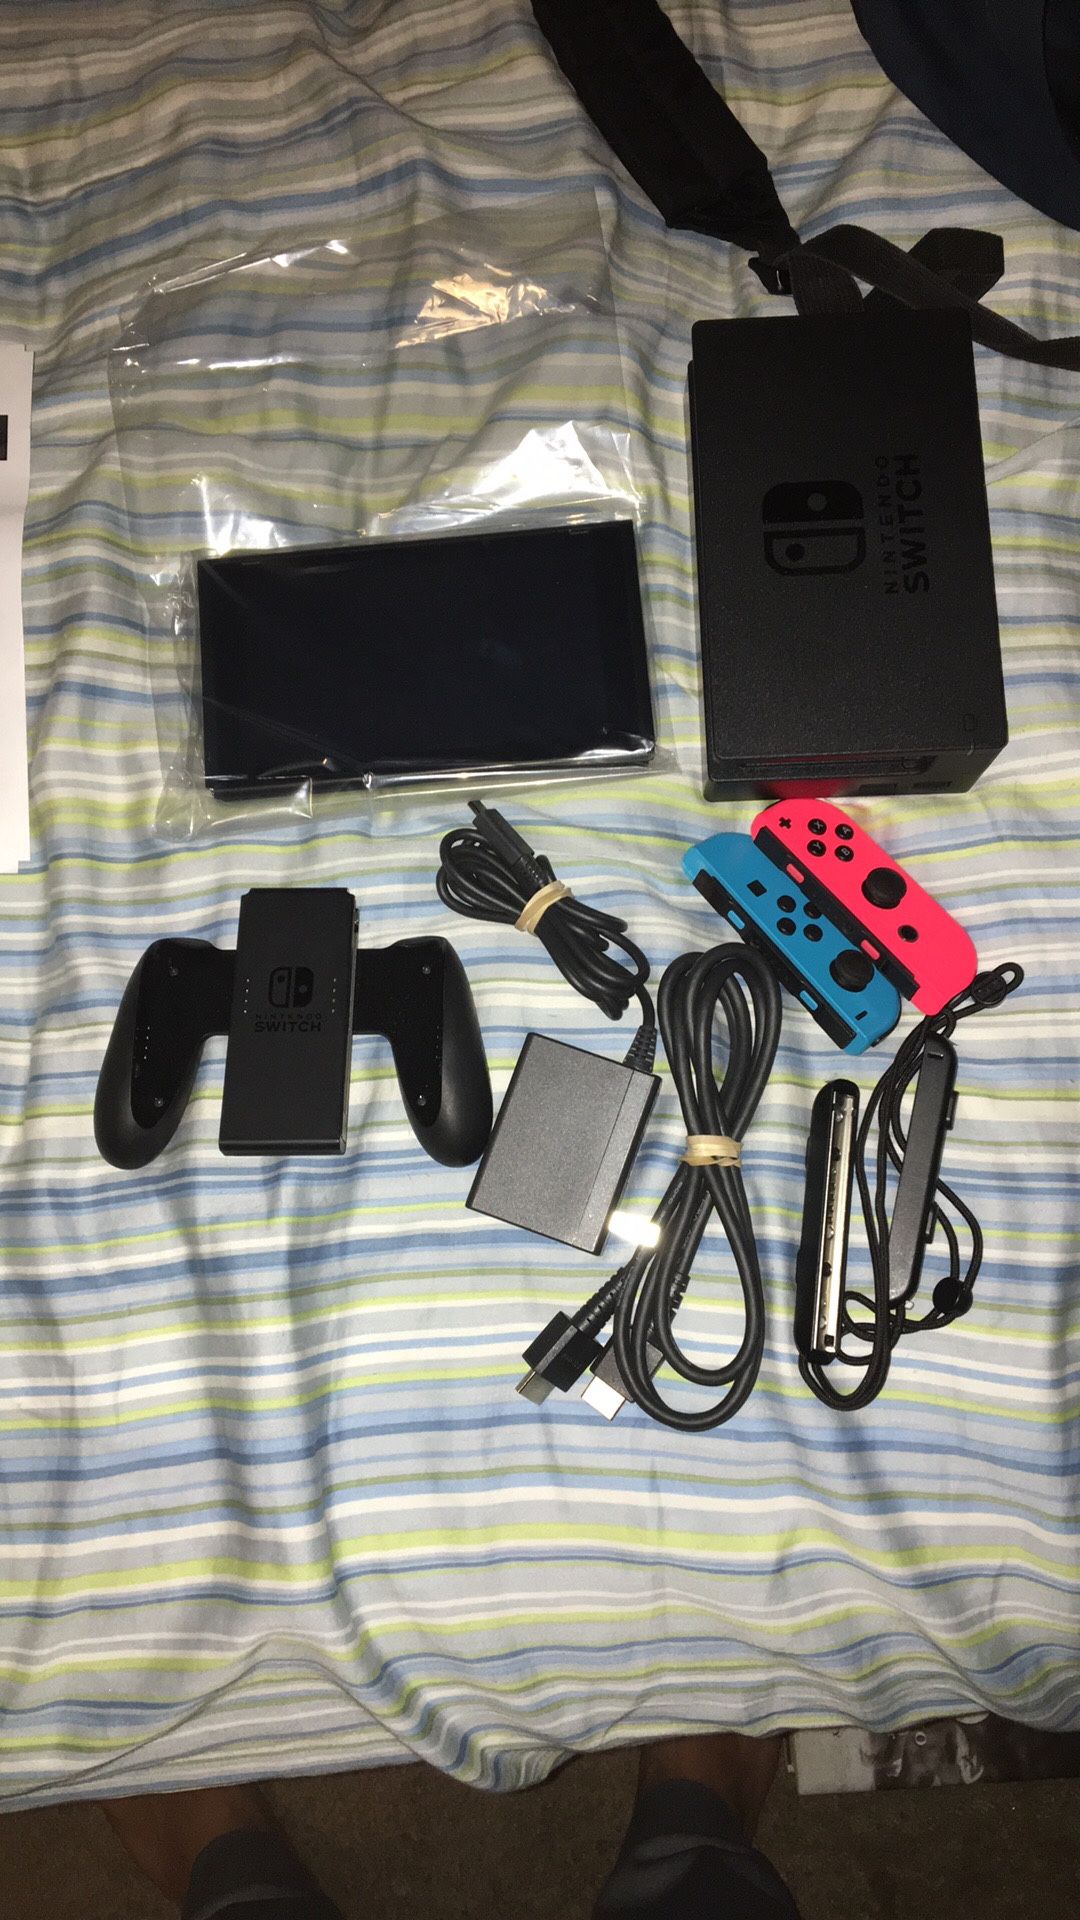 Nintendo Switch bought from Game stop